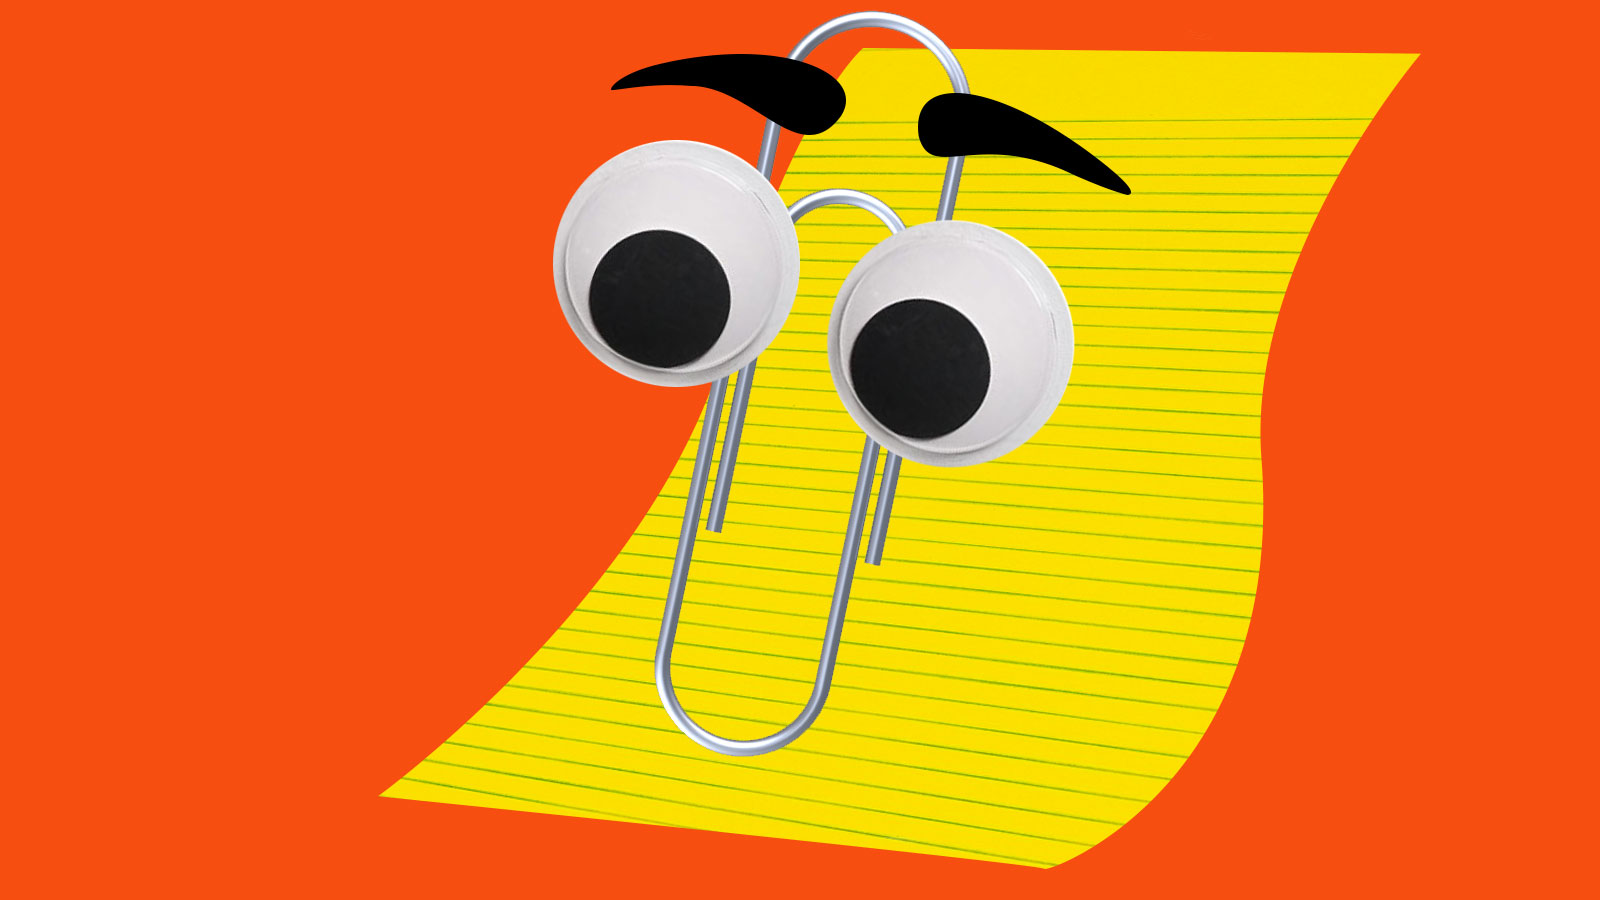 Clippy The Iconic Underappreciated Office Assistant We Never